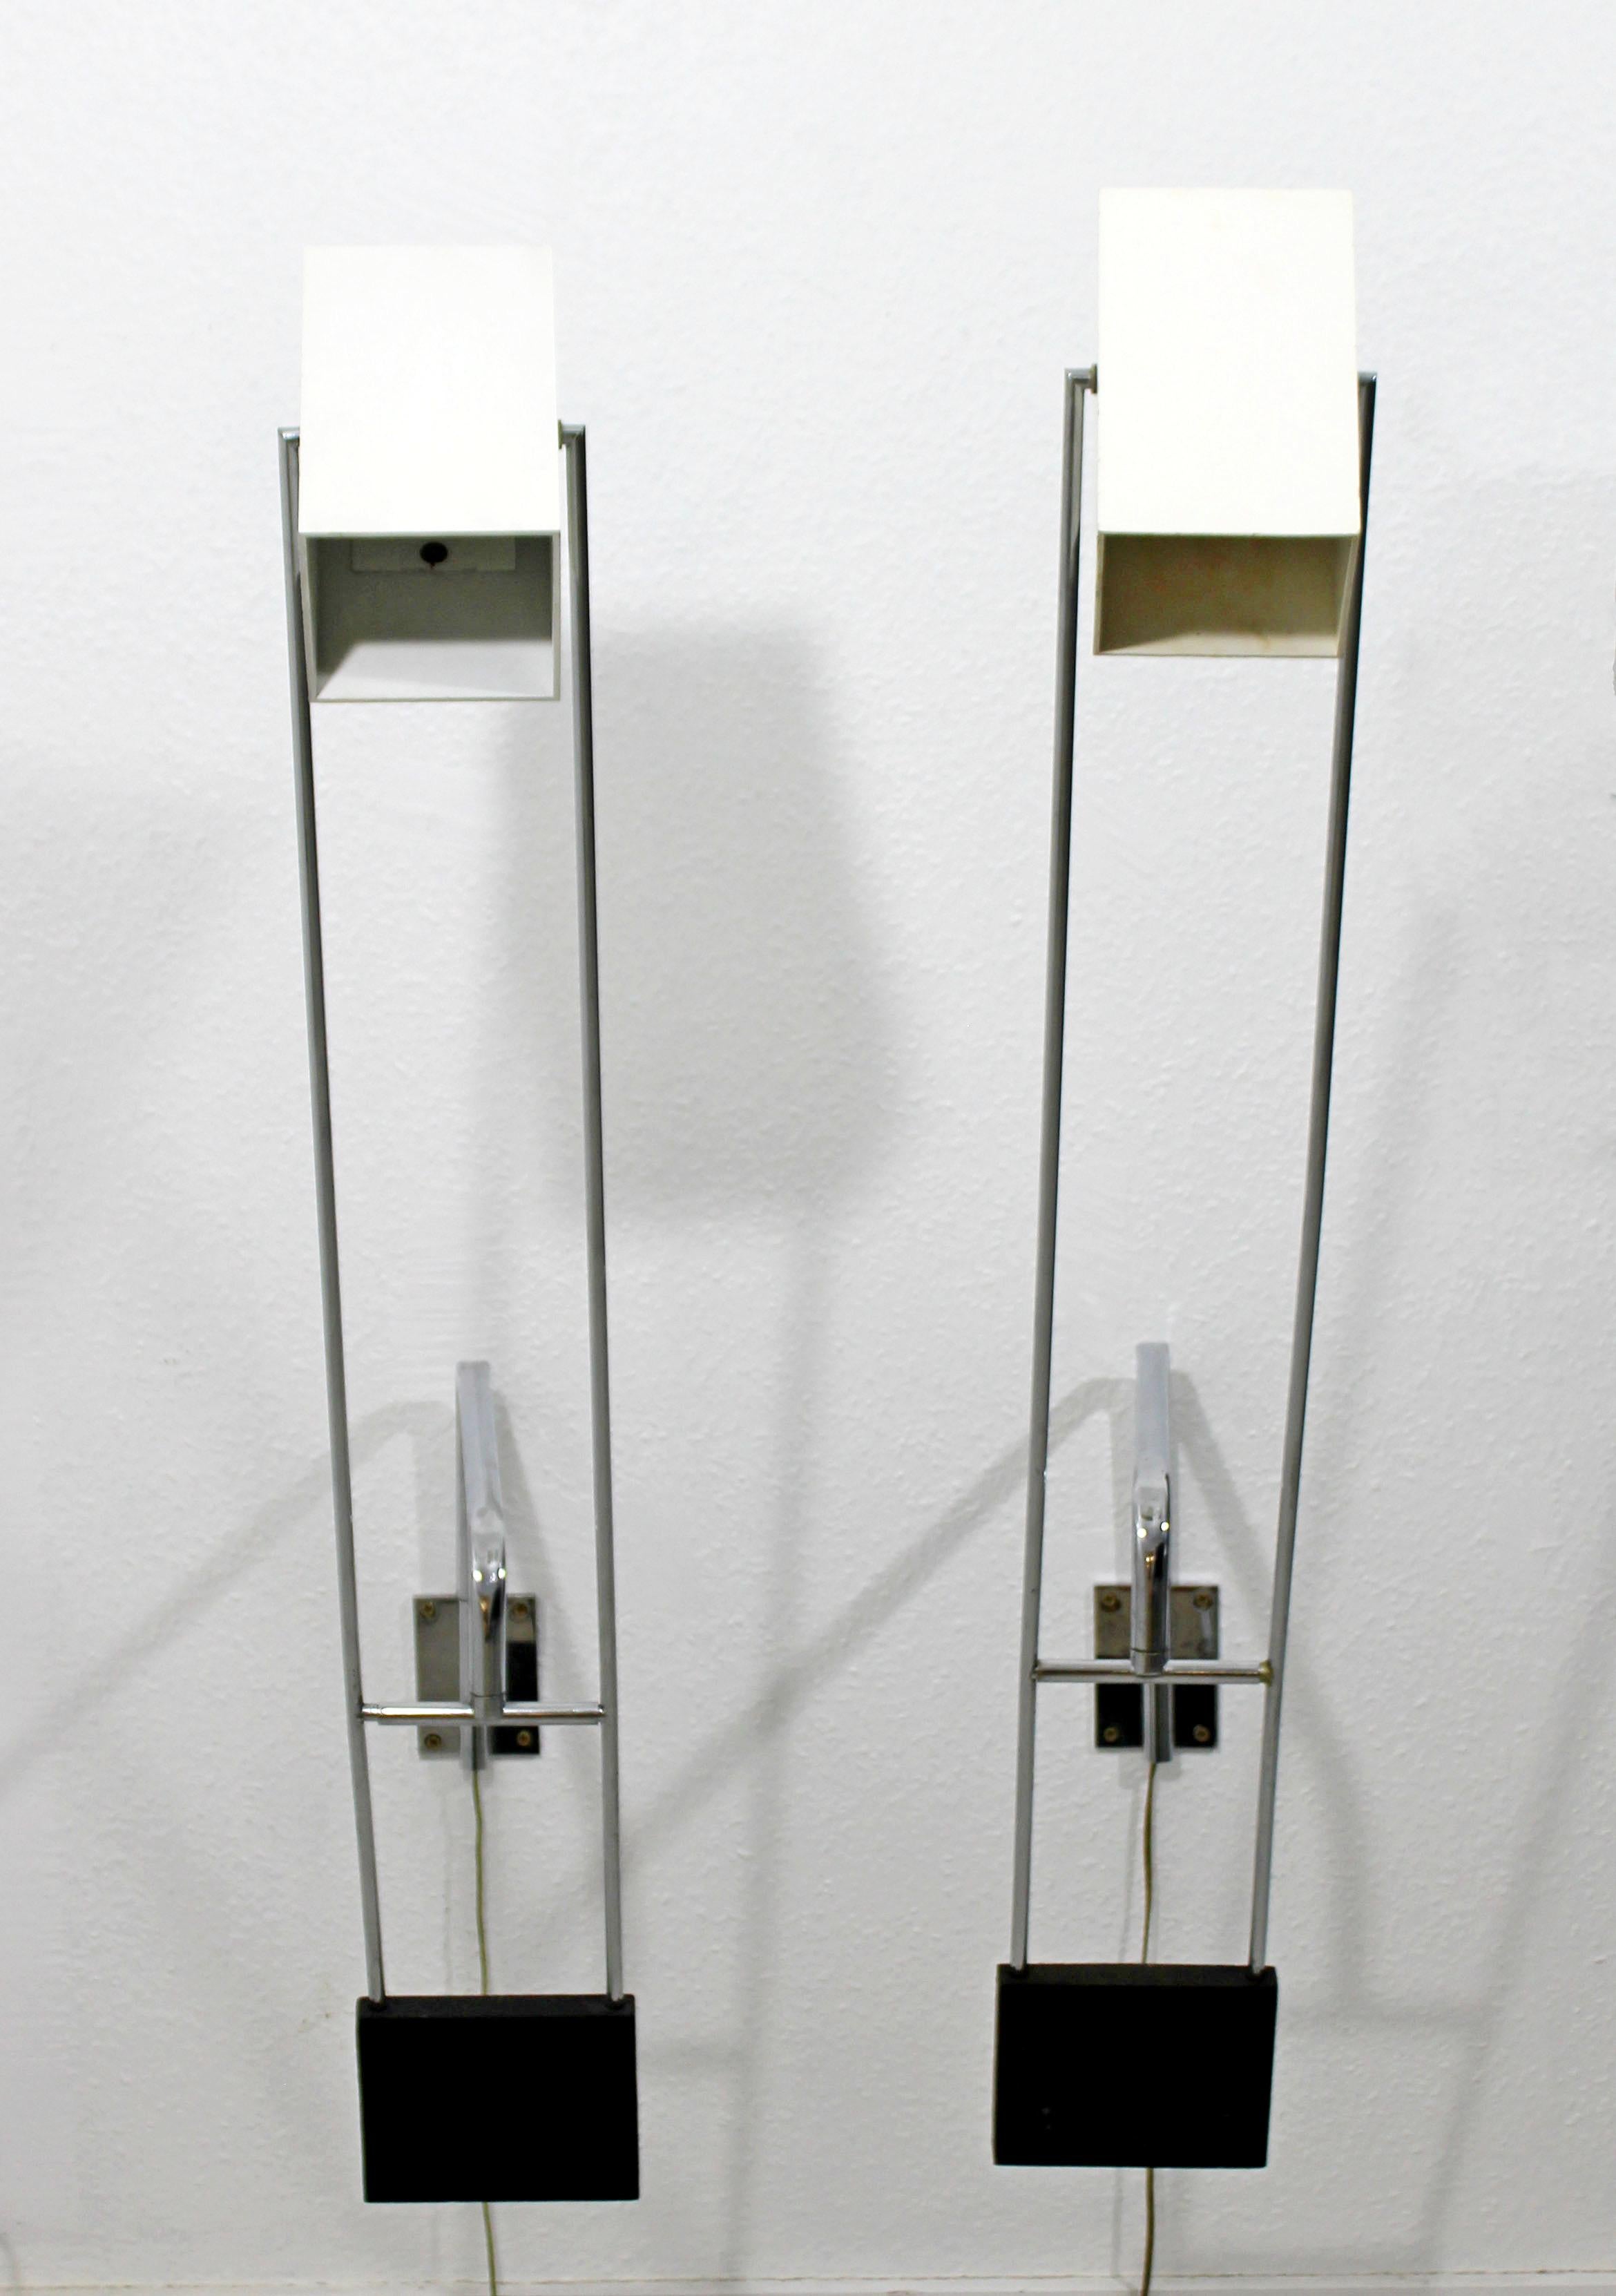 For your consideration is an incredibly unique pair of Sonneman adjustable, weighted, bedside reading lamps sconces. In very good condition. The dimensions of each are 6